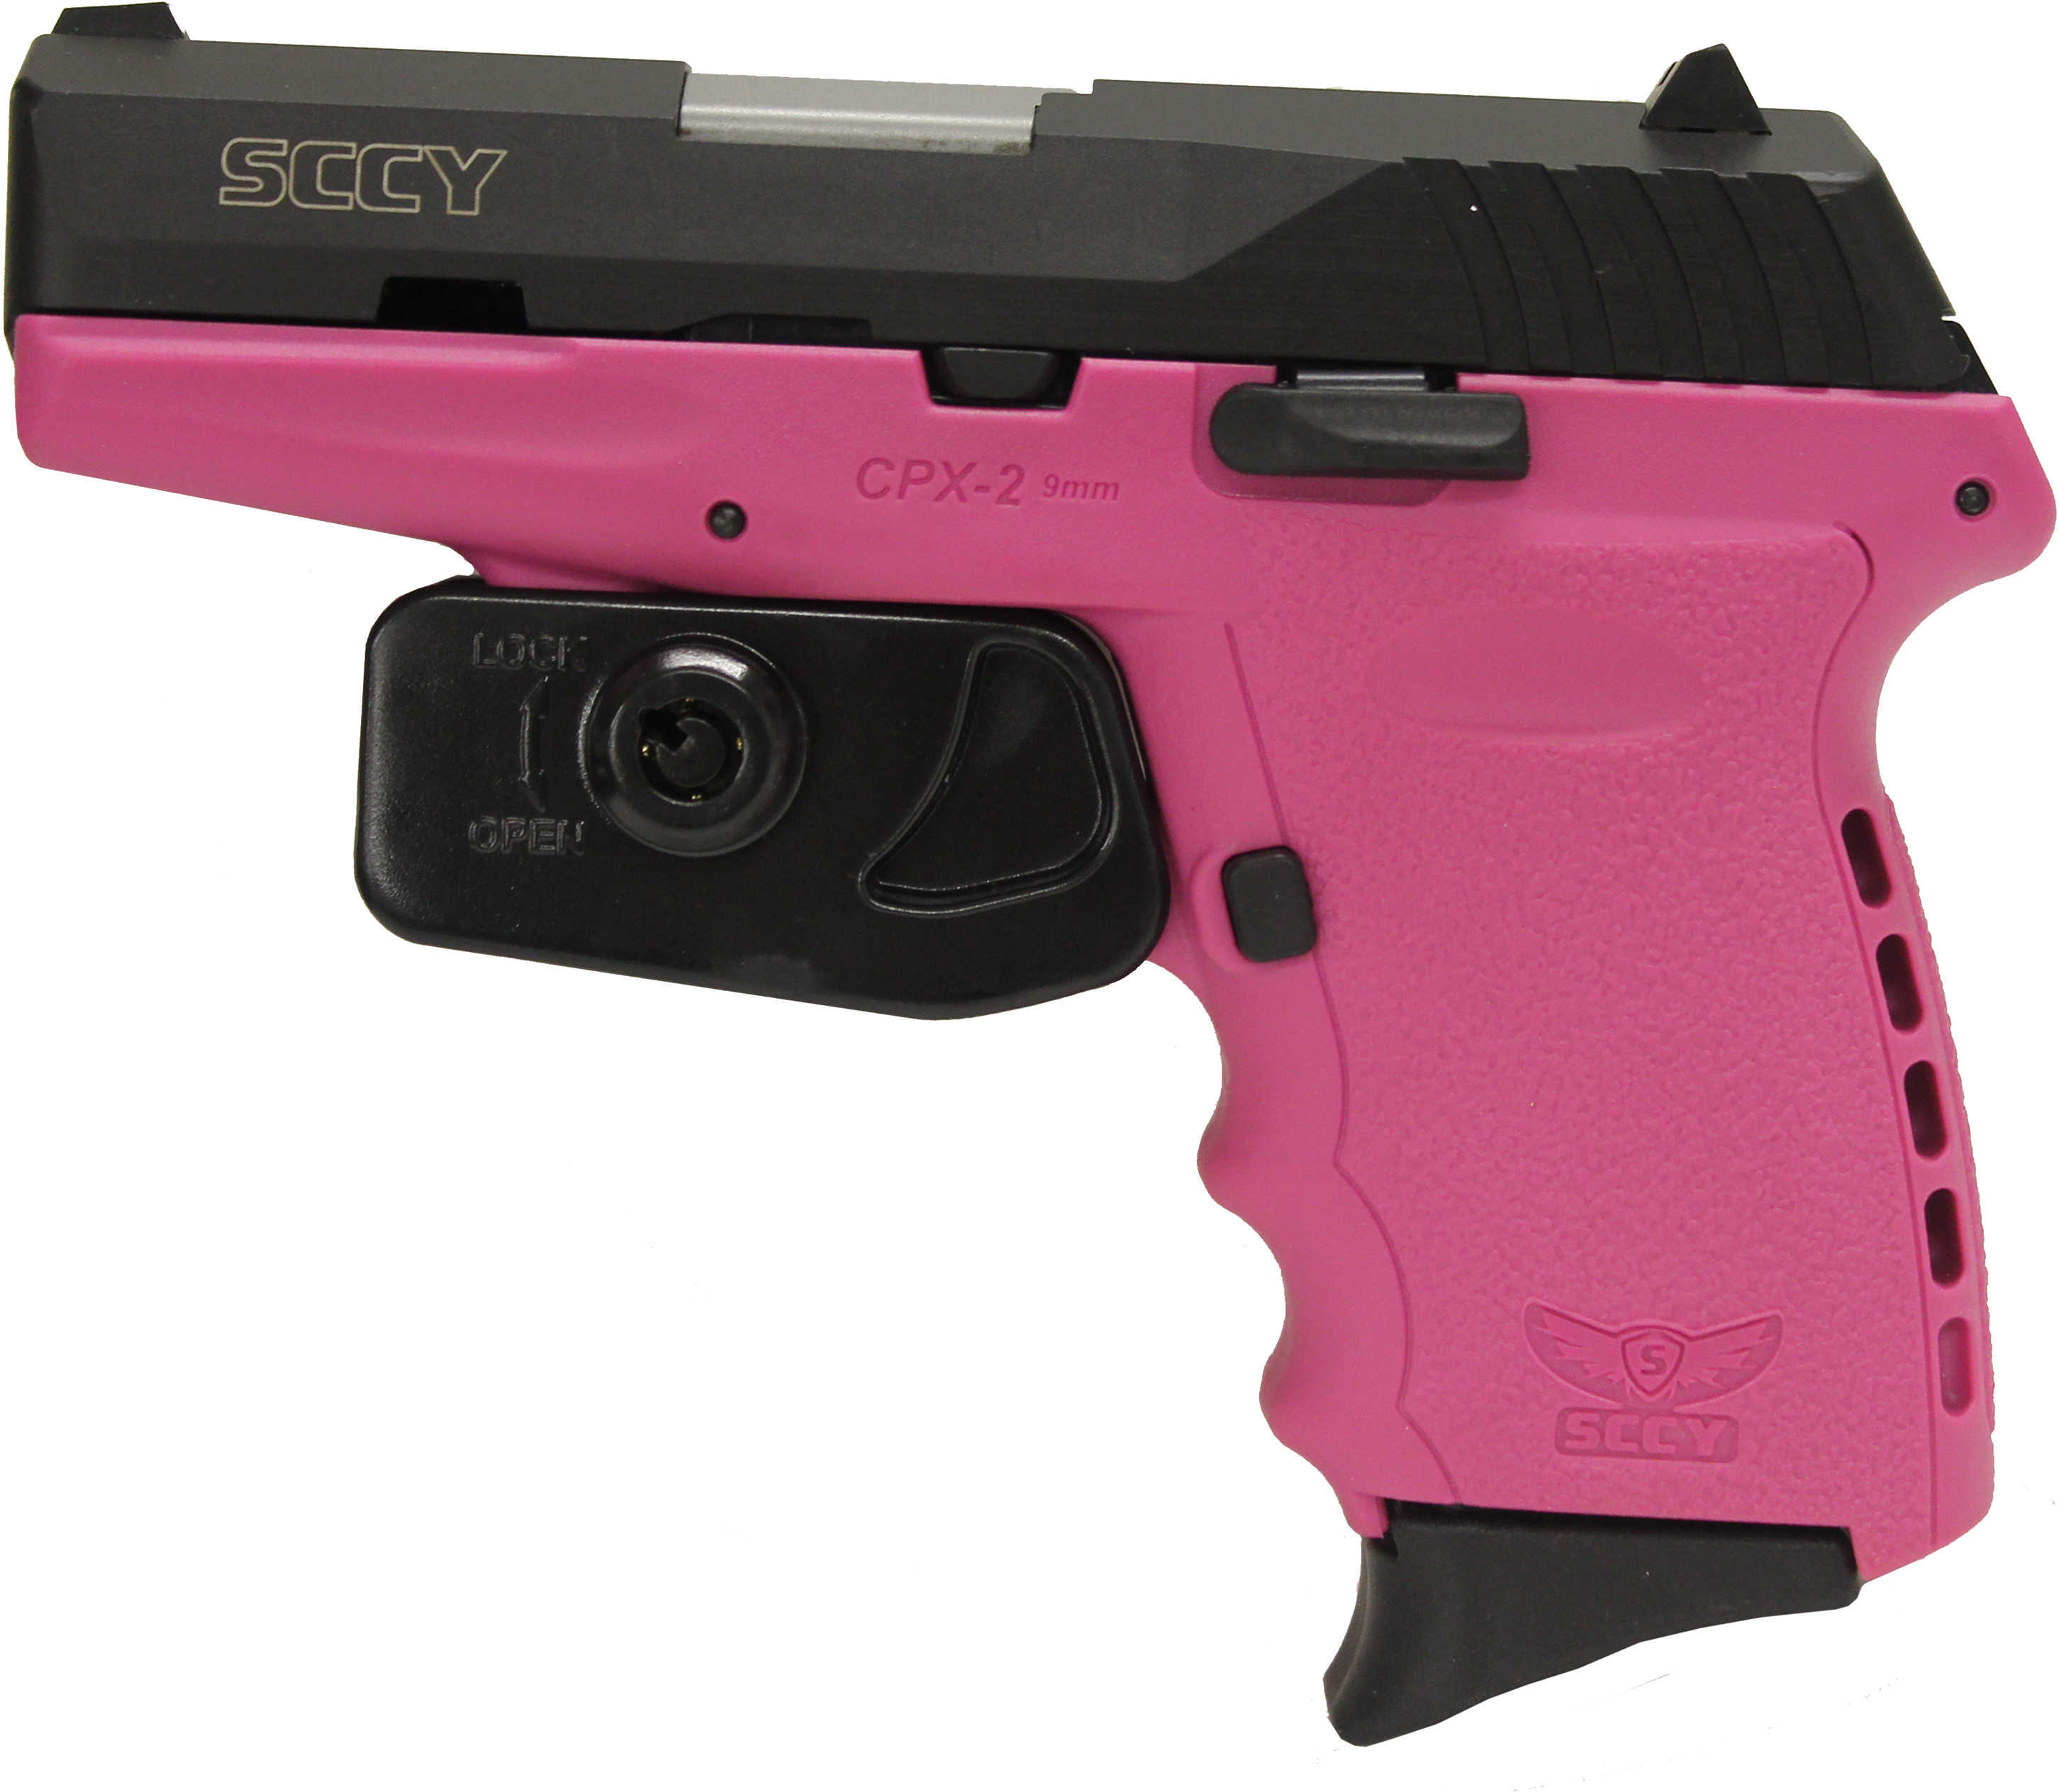 SCCY CPX-2 9mm Luger 3.1" Barrel 10 Round 2 Magazines Double Action Compact Polymer Pink Semi Automatic Pistol CBPK